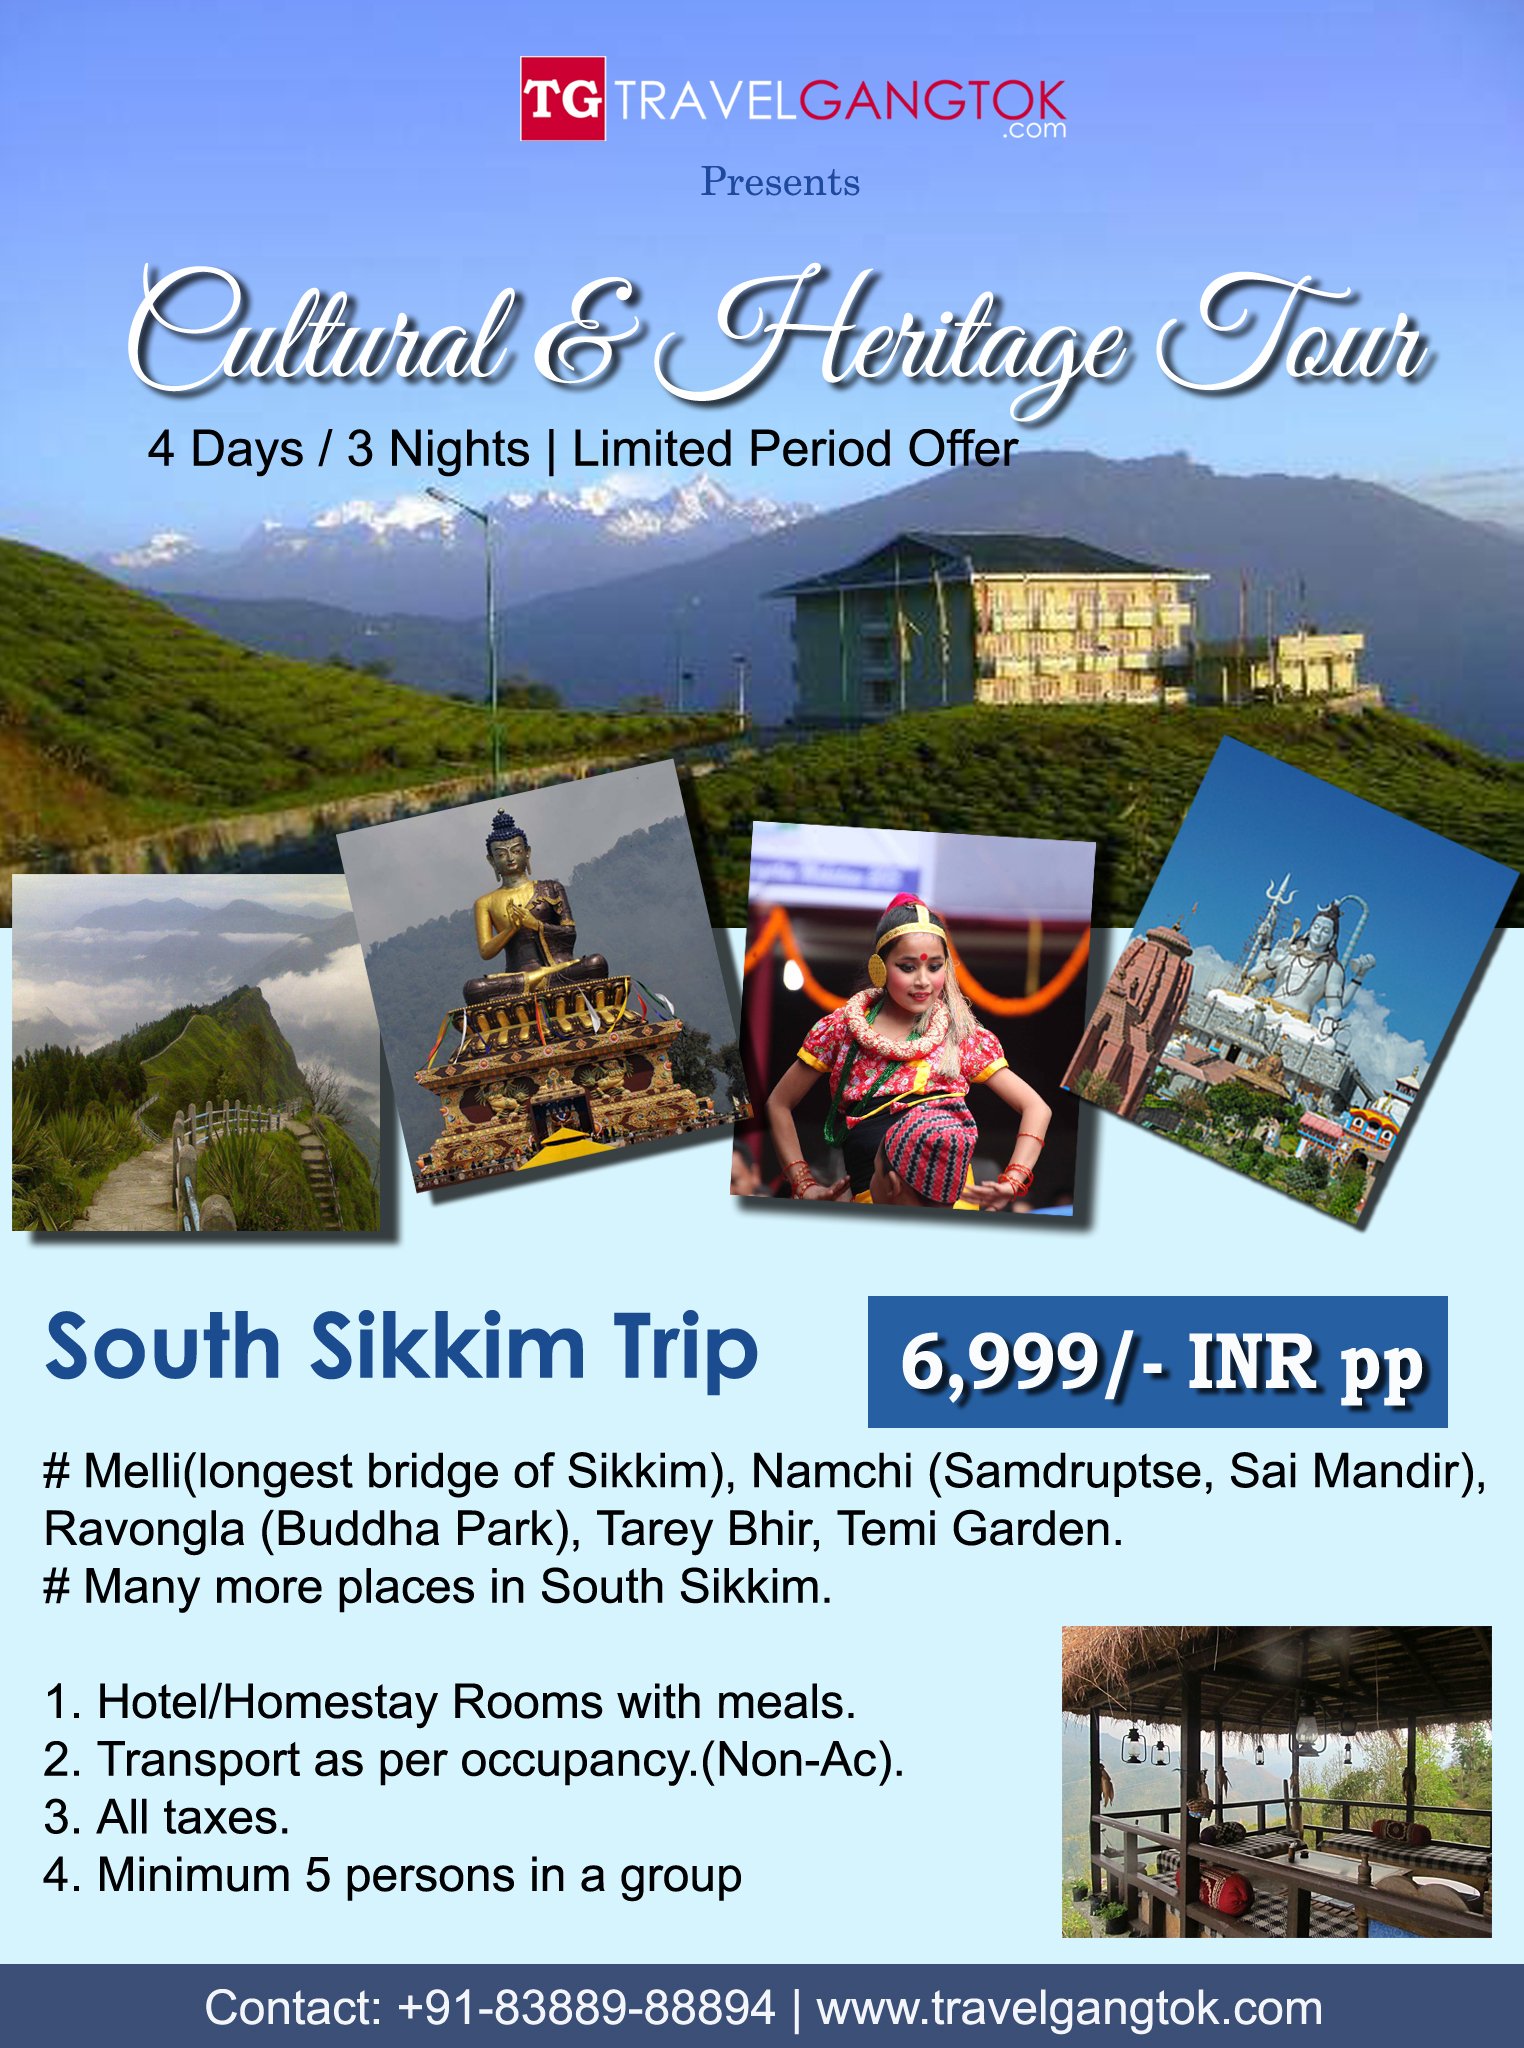 sikkim tourism packages price